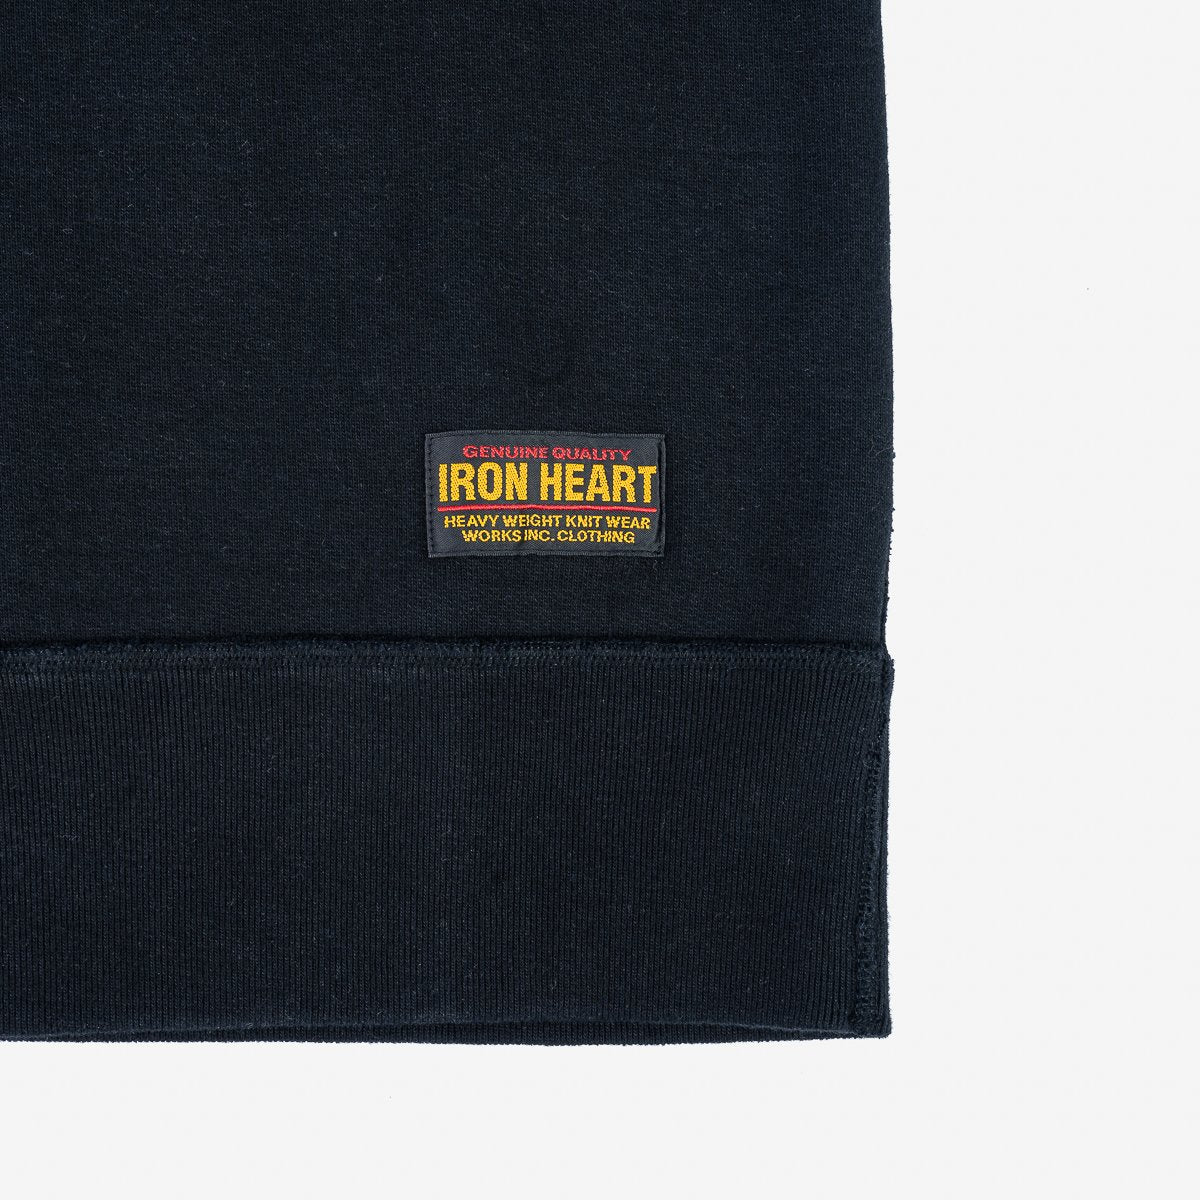 Iron Heart IHTL-1301 Waffle Knit Long Sleeved Crew Neck Thermal